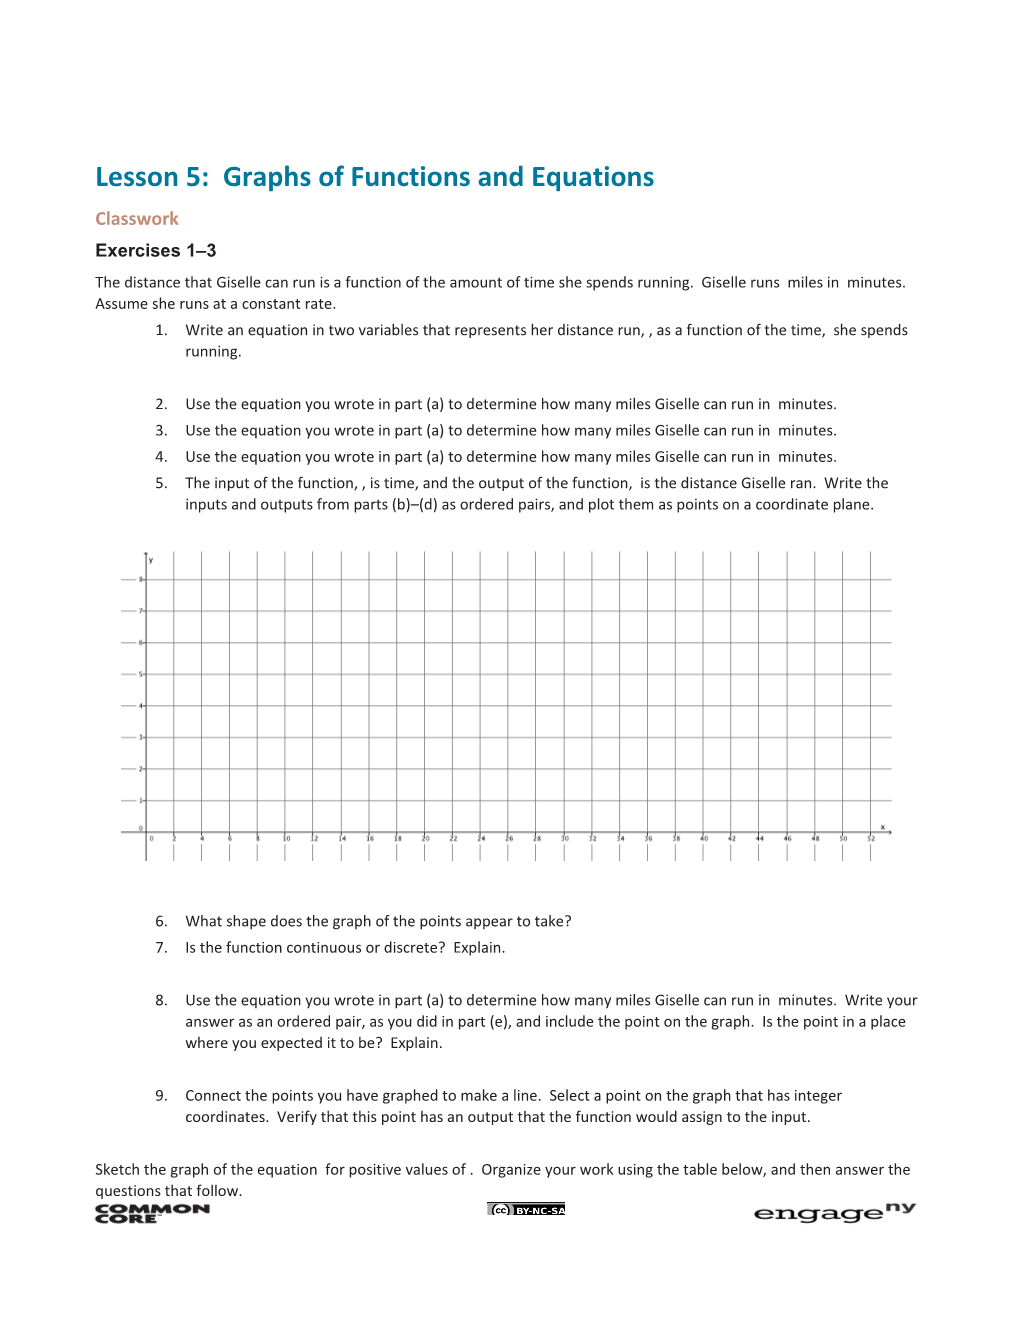 Lesson 5: Graphs of Functions and Equations